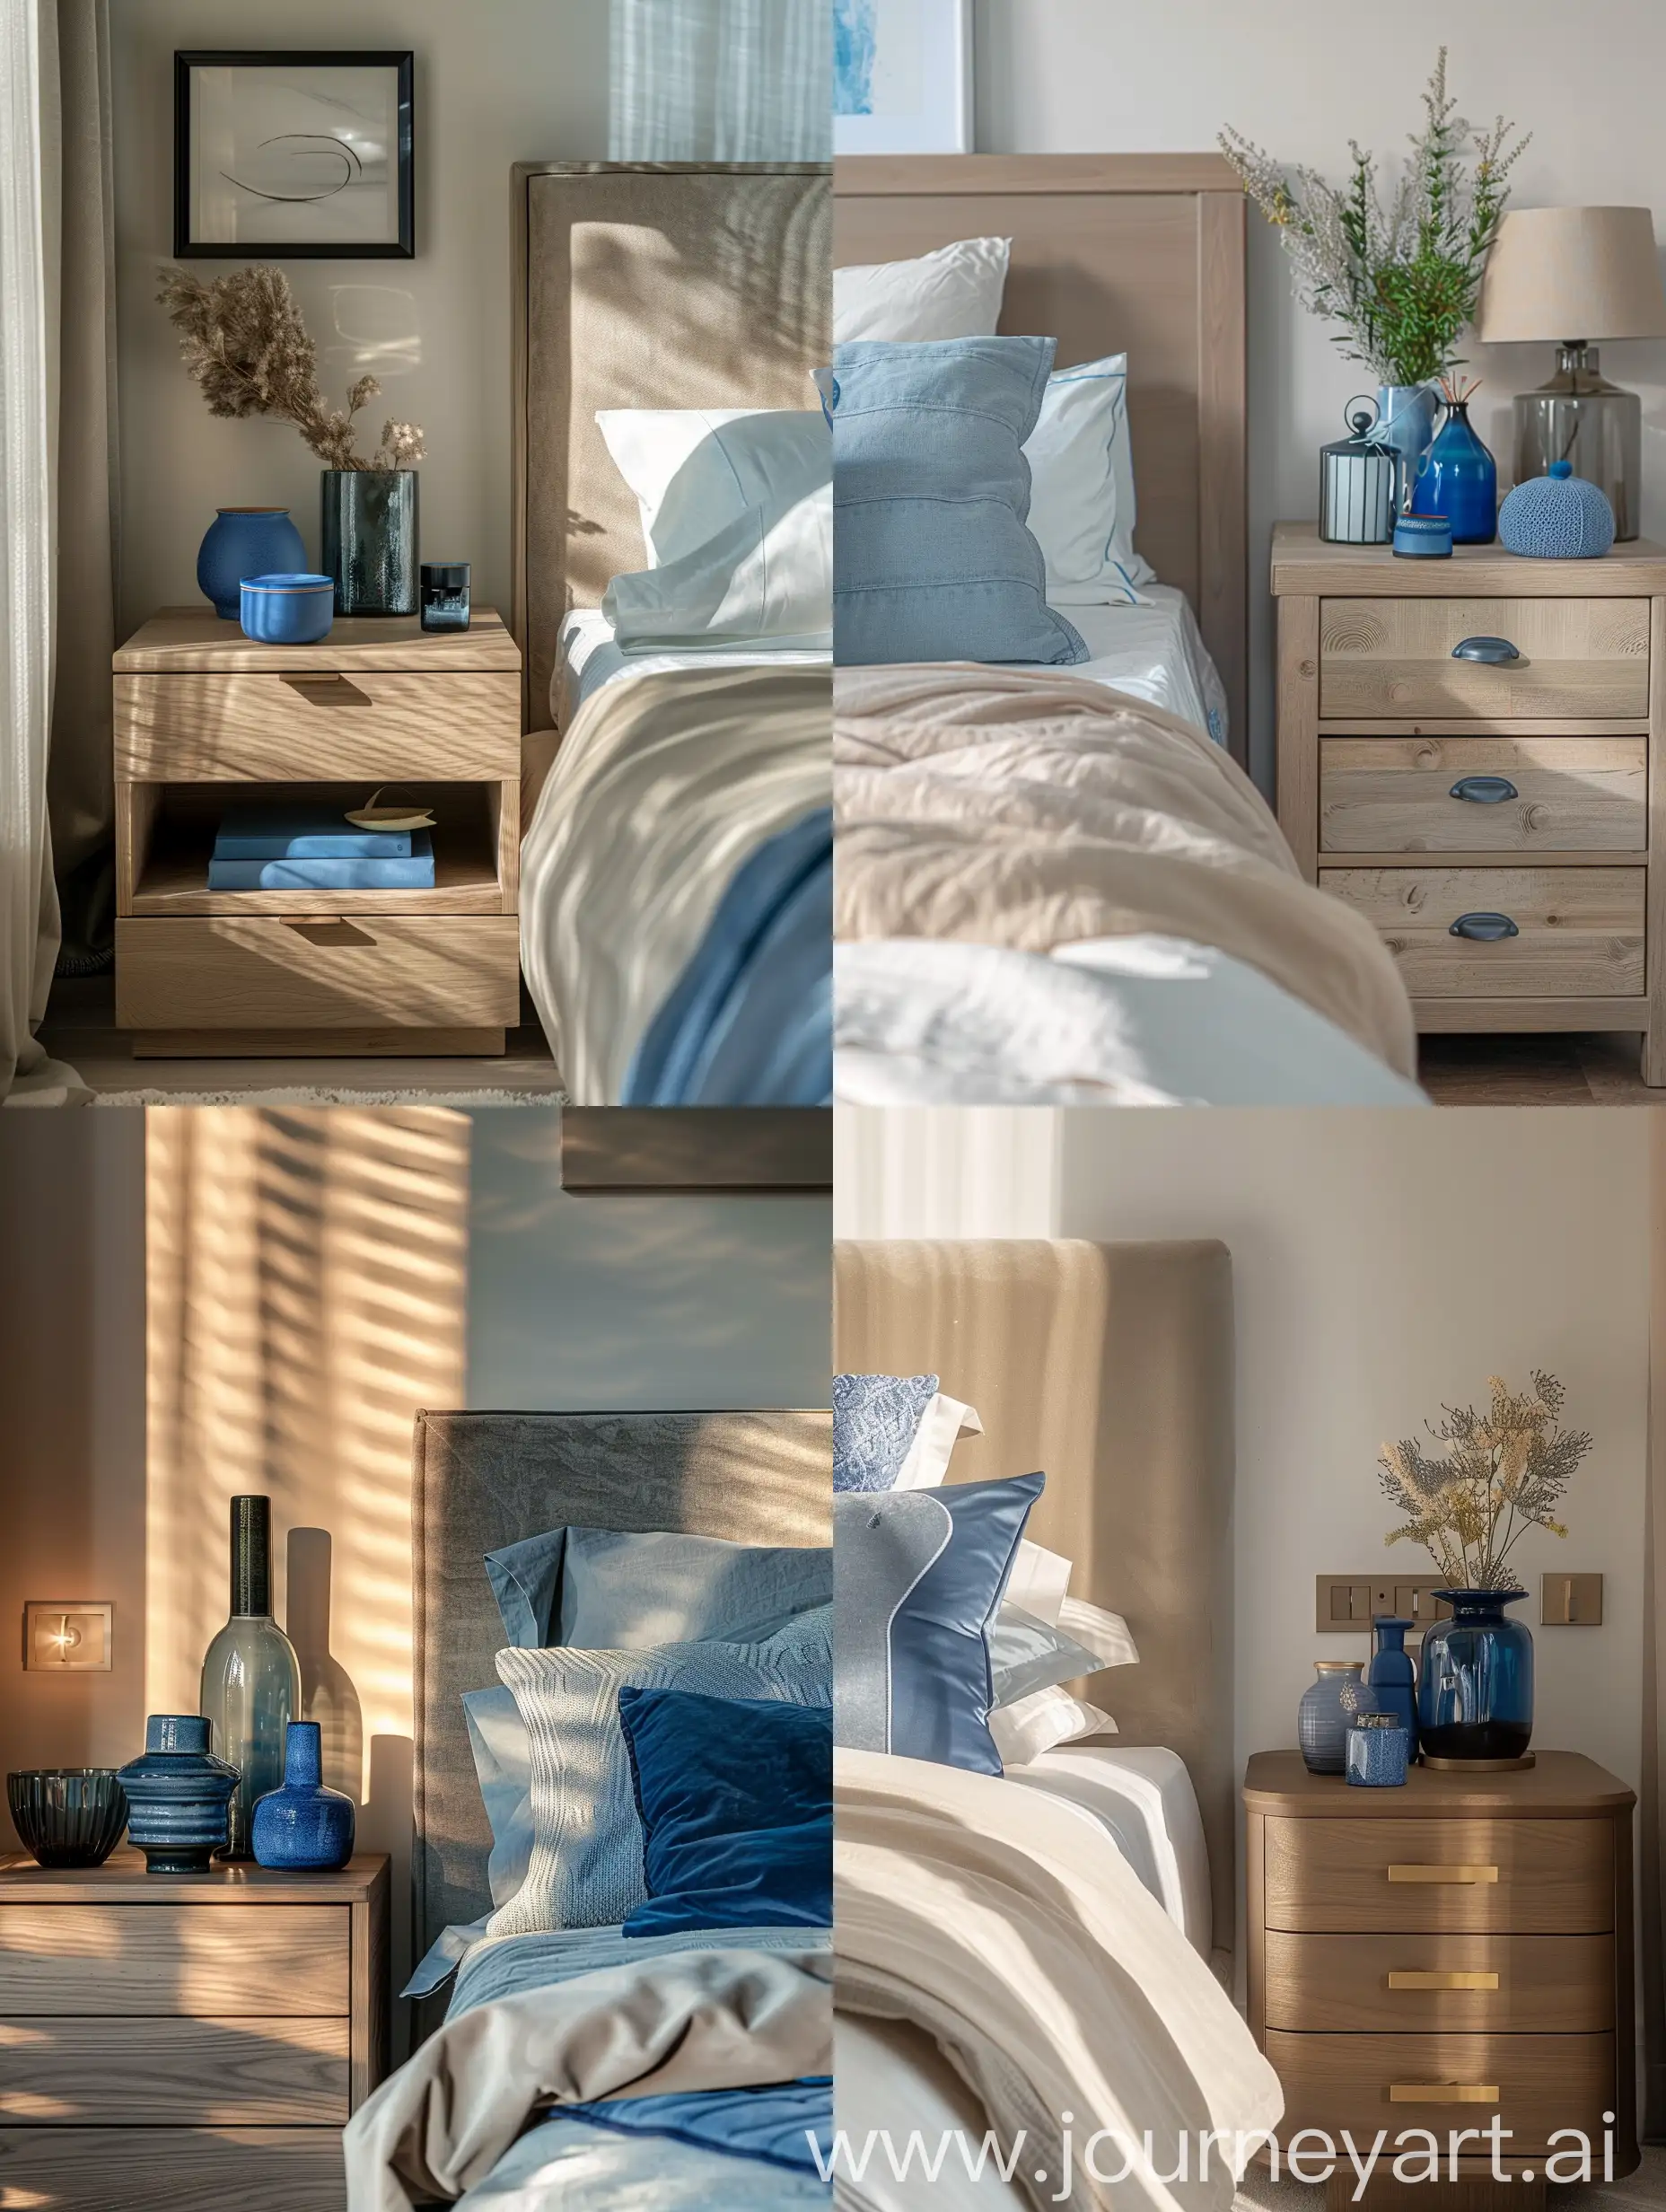 Modern-Bedroom-Bedside-Table-with-Blue-Accessories-in-Warm-Morning-Light